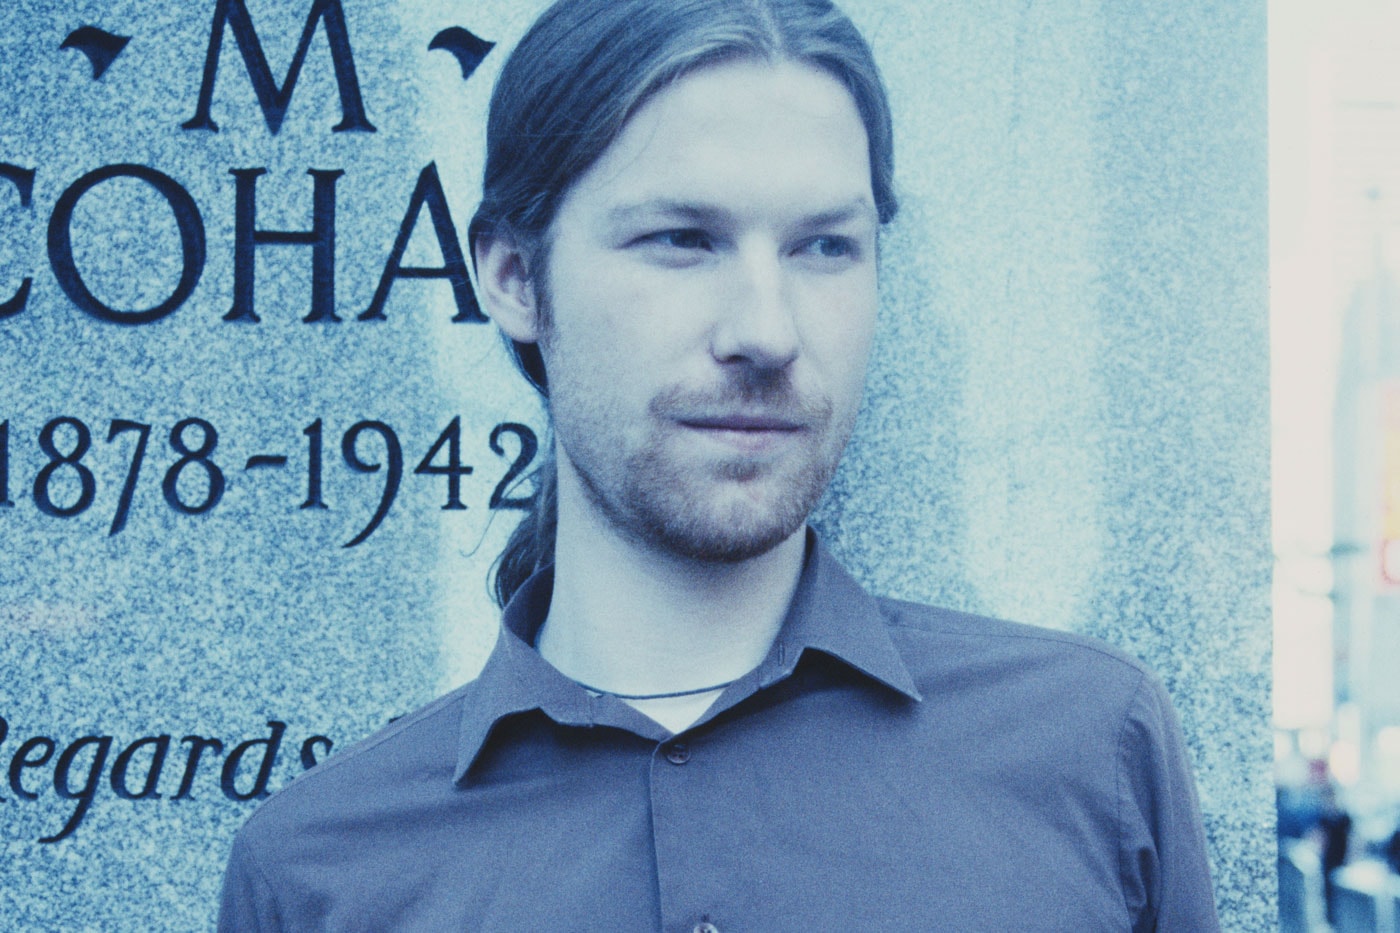 Aphex Twin Continues to Experiment with "T17 Phase Out"